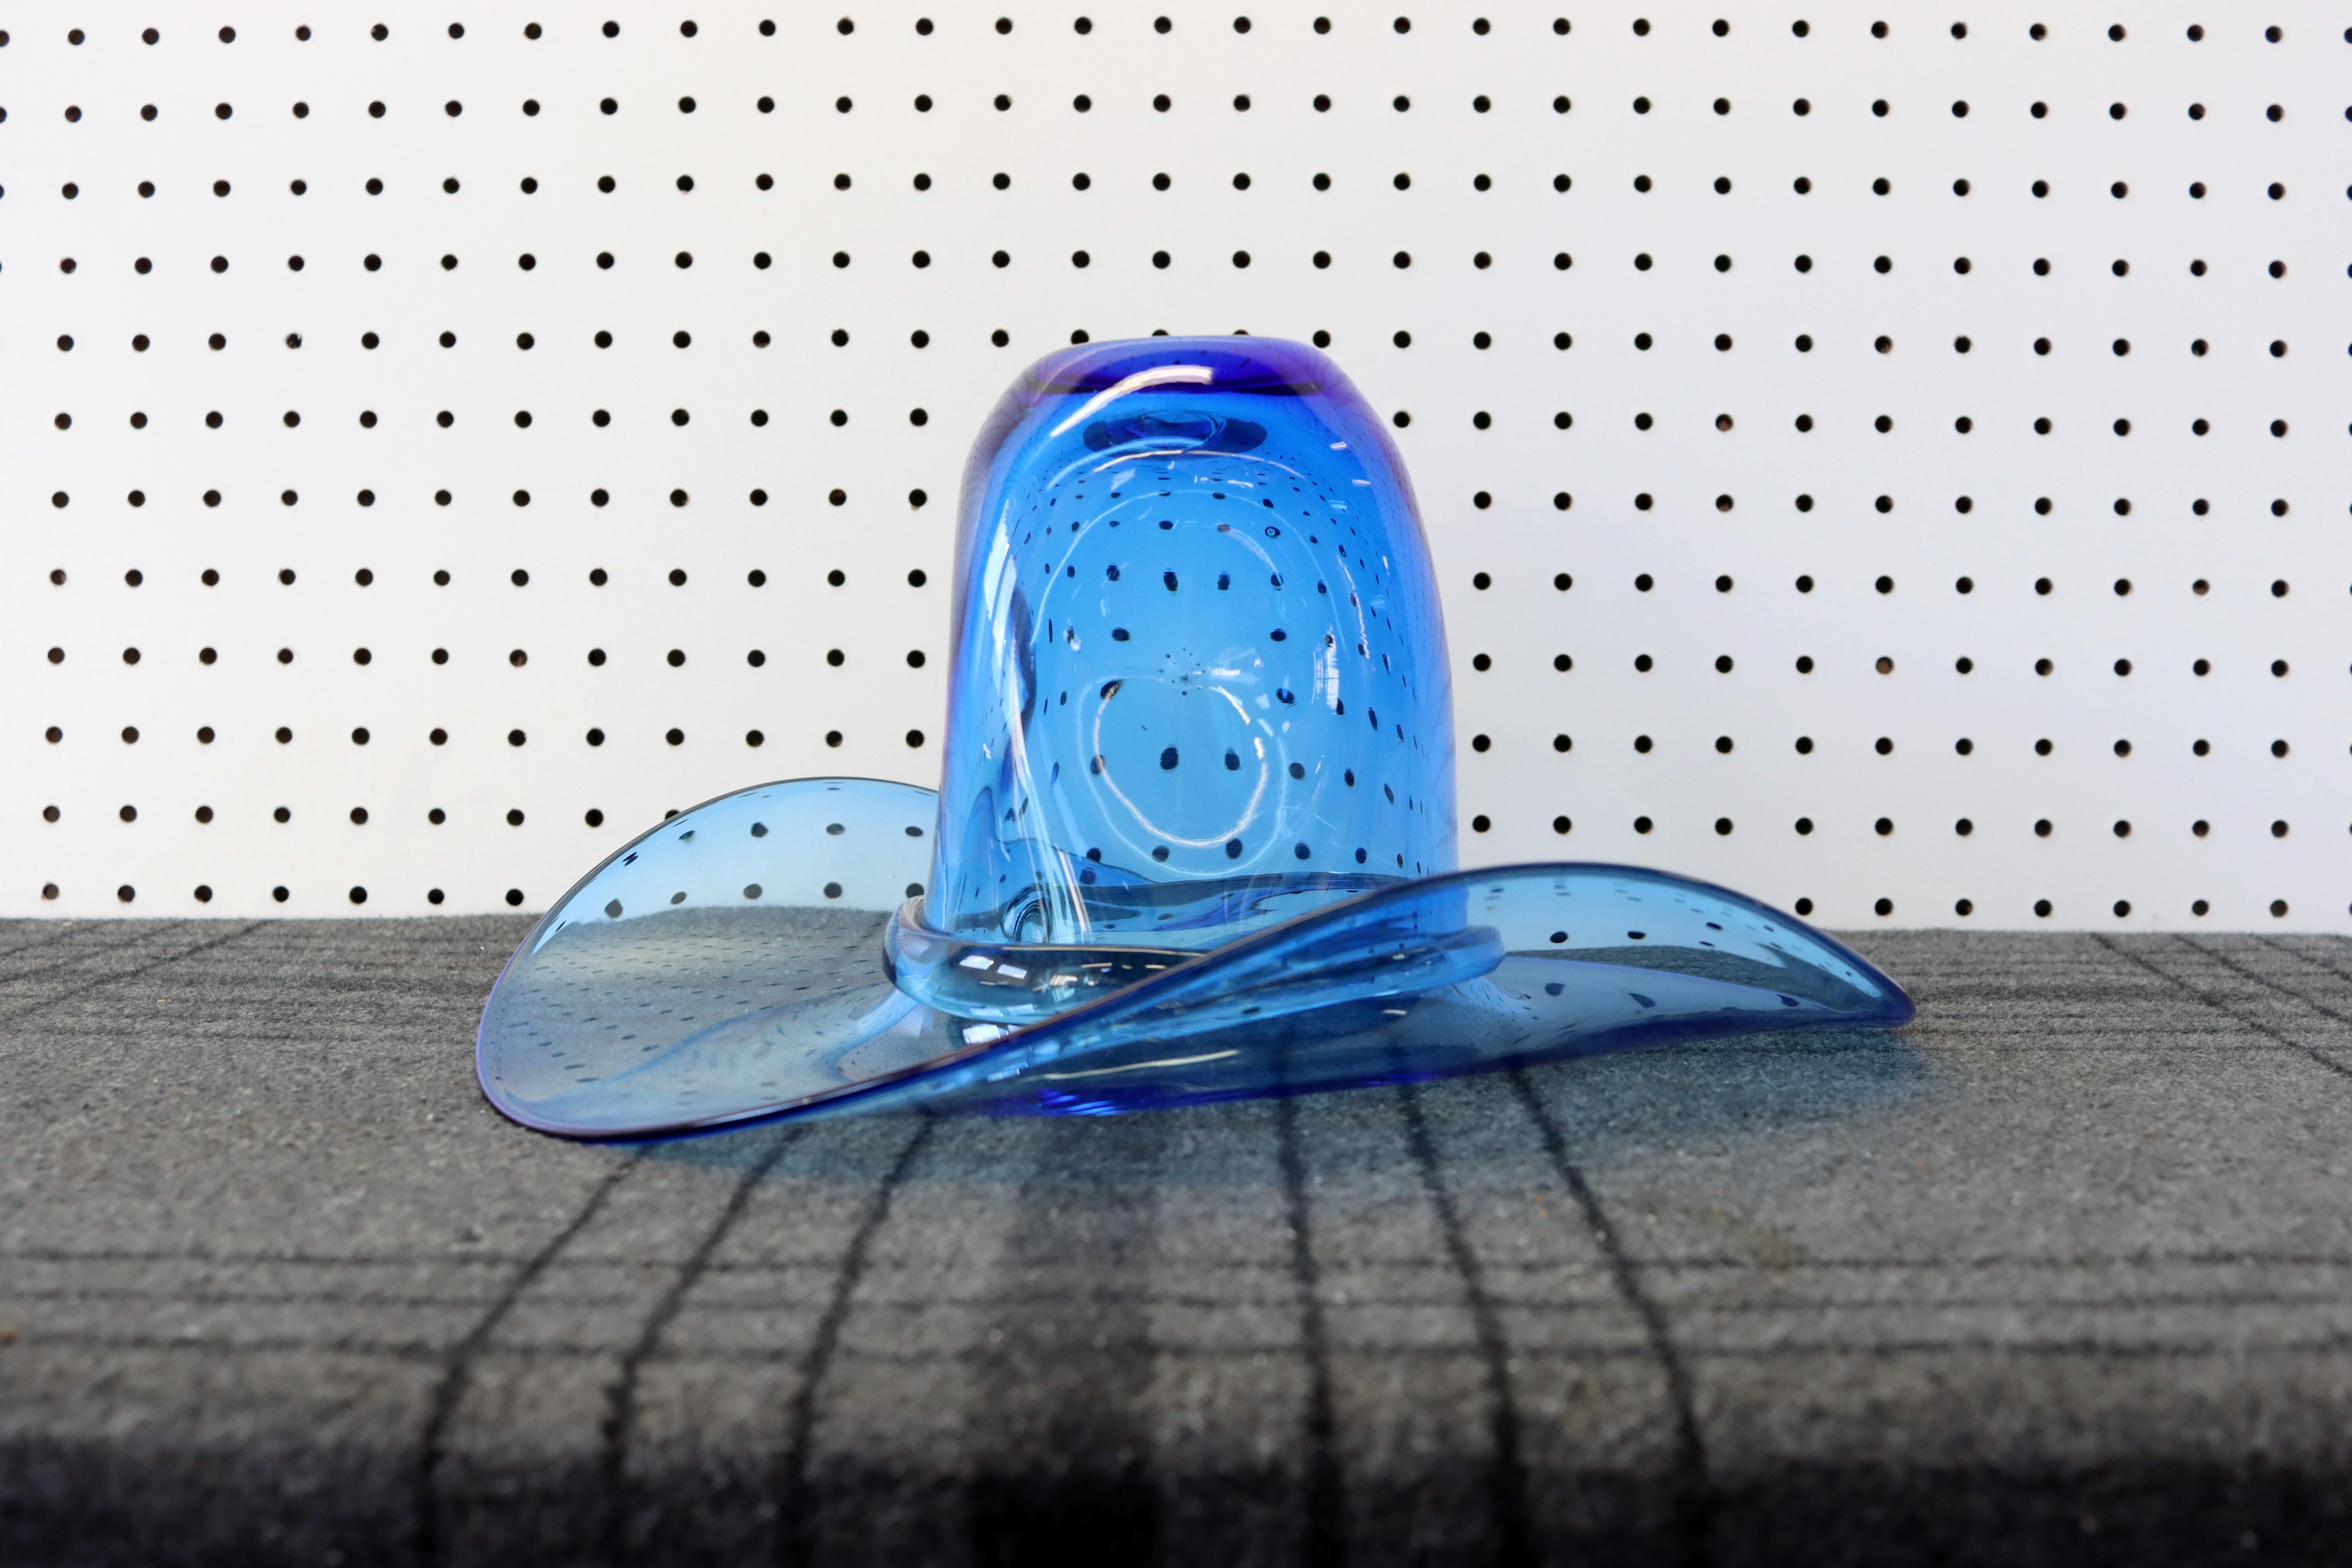 A scarcely seen blue Blenko Glass cowboy hat. Use it as a vase, ice bucket, or art glass sculpture. Heck, you could even wear it for a night out on the town.

In great vintage condition with no chips, scratches, or cracks.

Measures 11” wide x